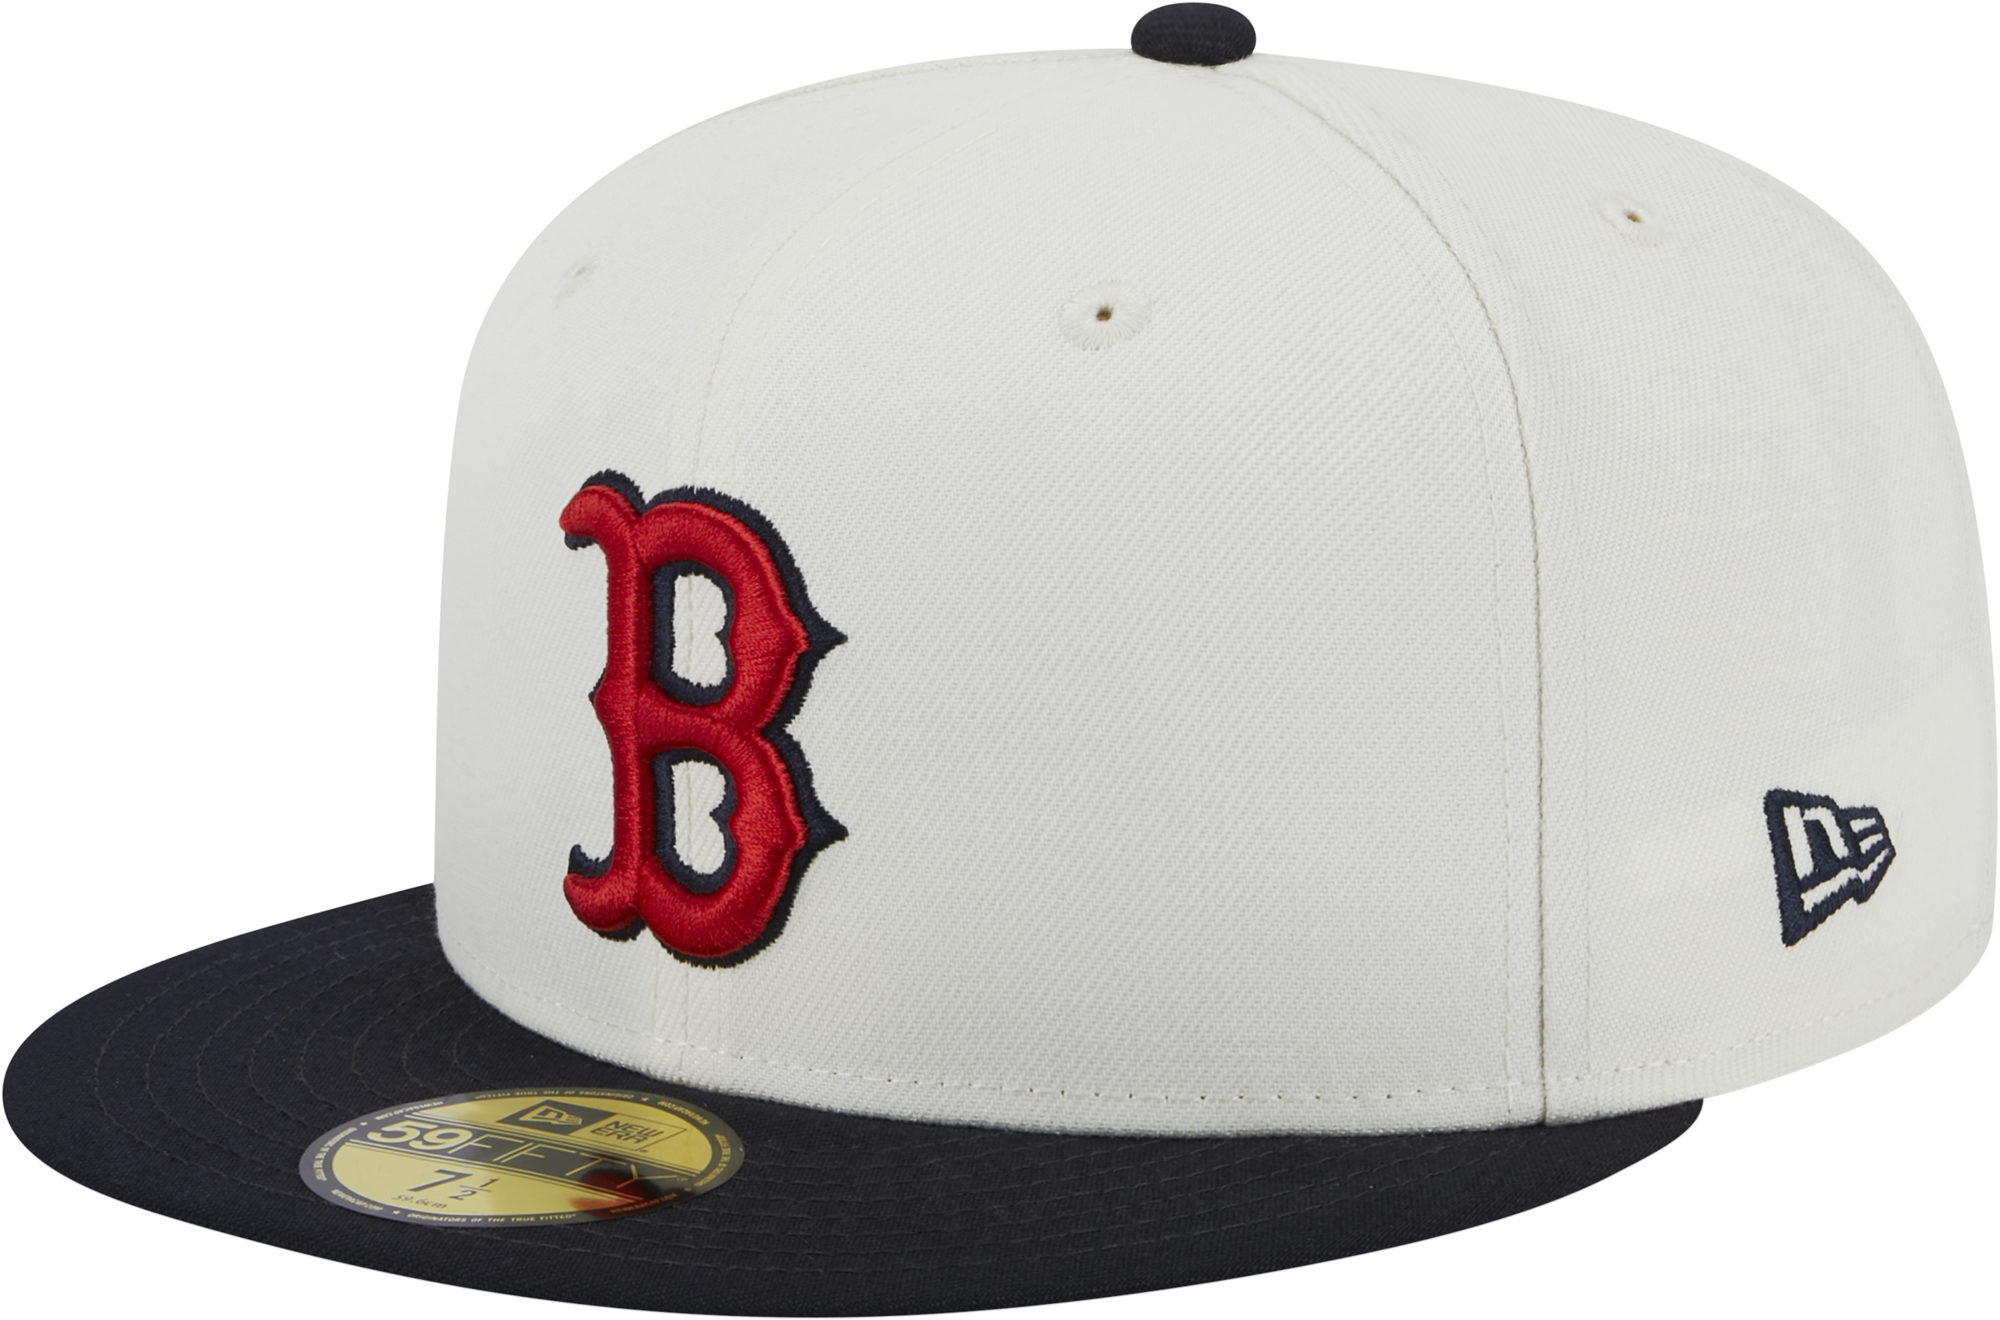 New Era Red Sox 5950 Retro Fitted Cap